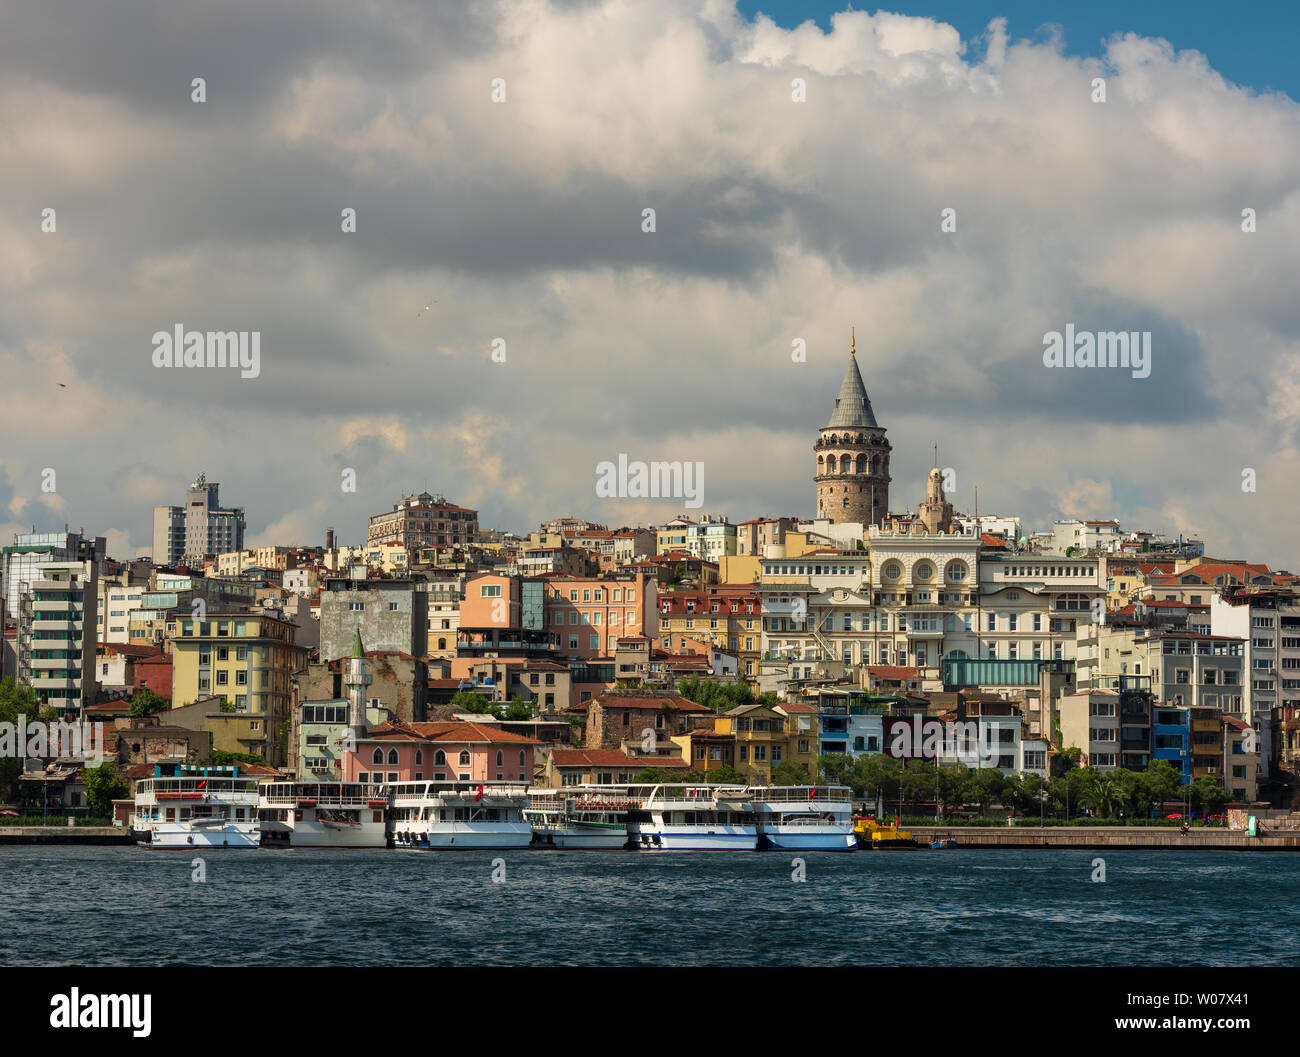 Beyoglu district old houses with Galata tower on top, view from the Golden Horn. June 26, 2019, Istanbul, Turkey Stock Photo